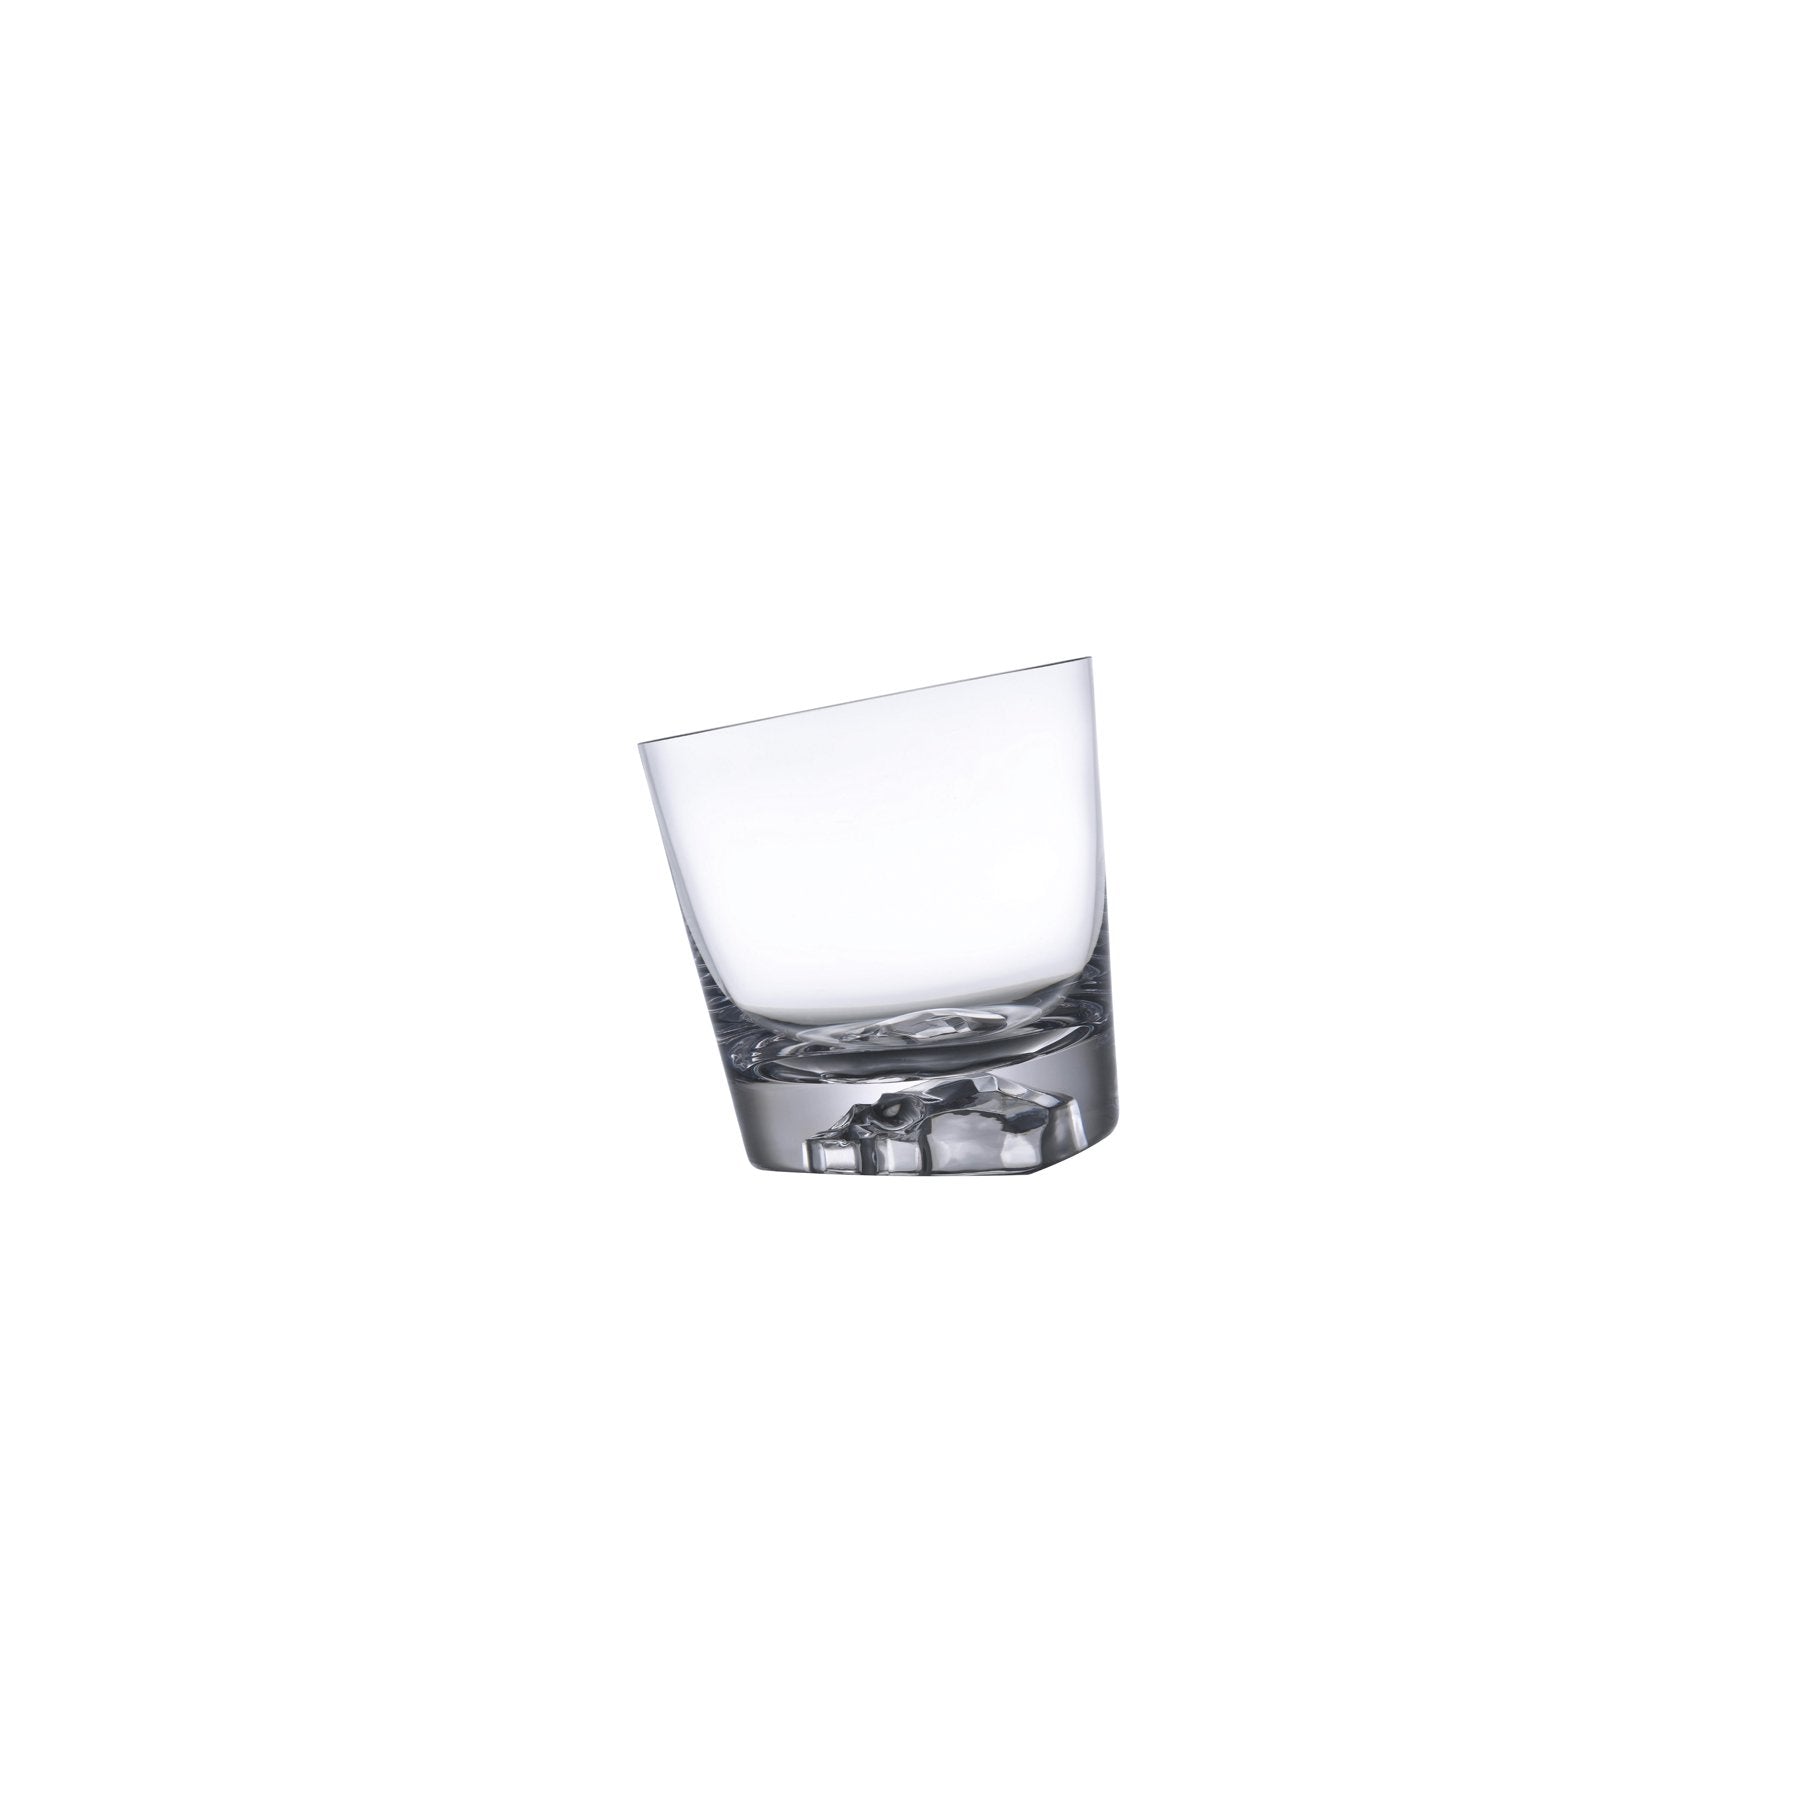 memento mori set of 2 whiskey glasses by nude at adorn.house